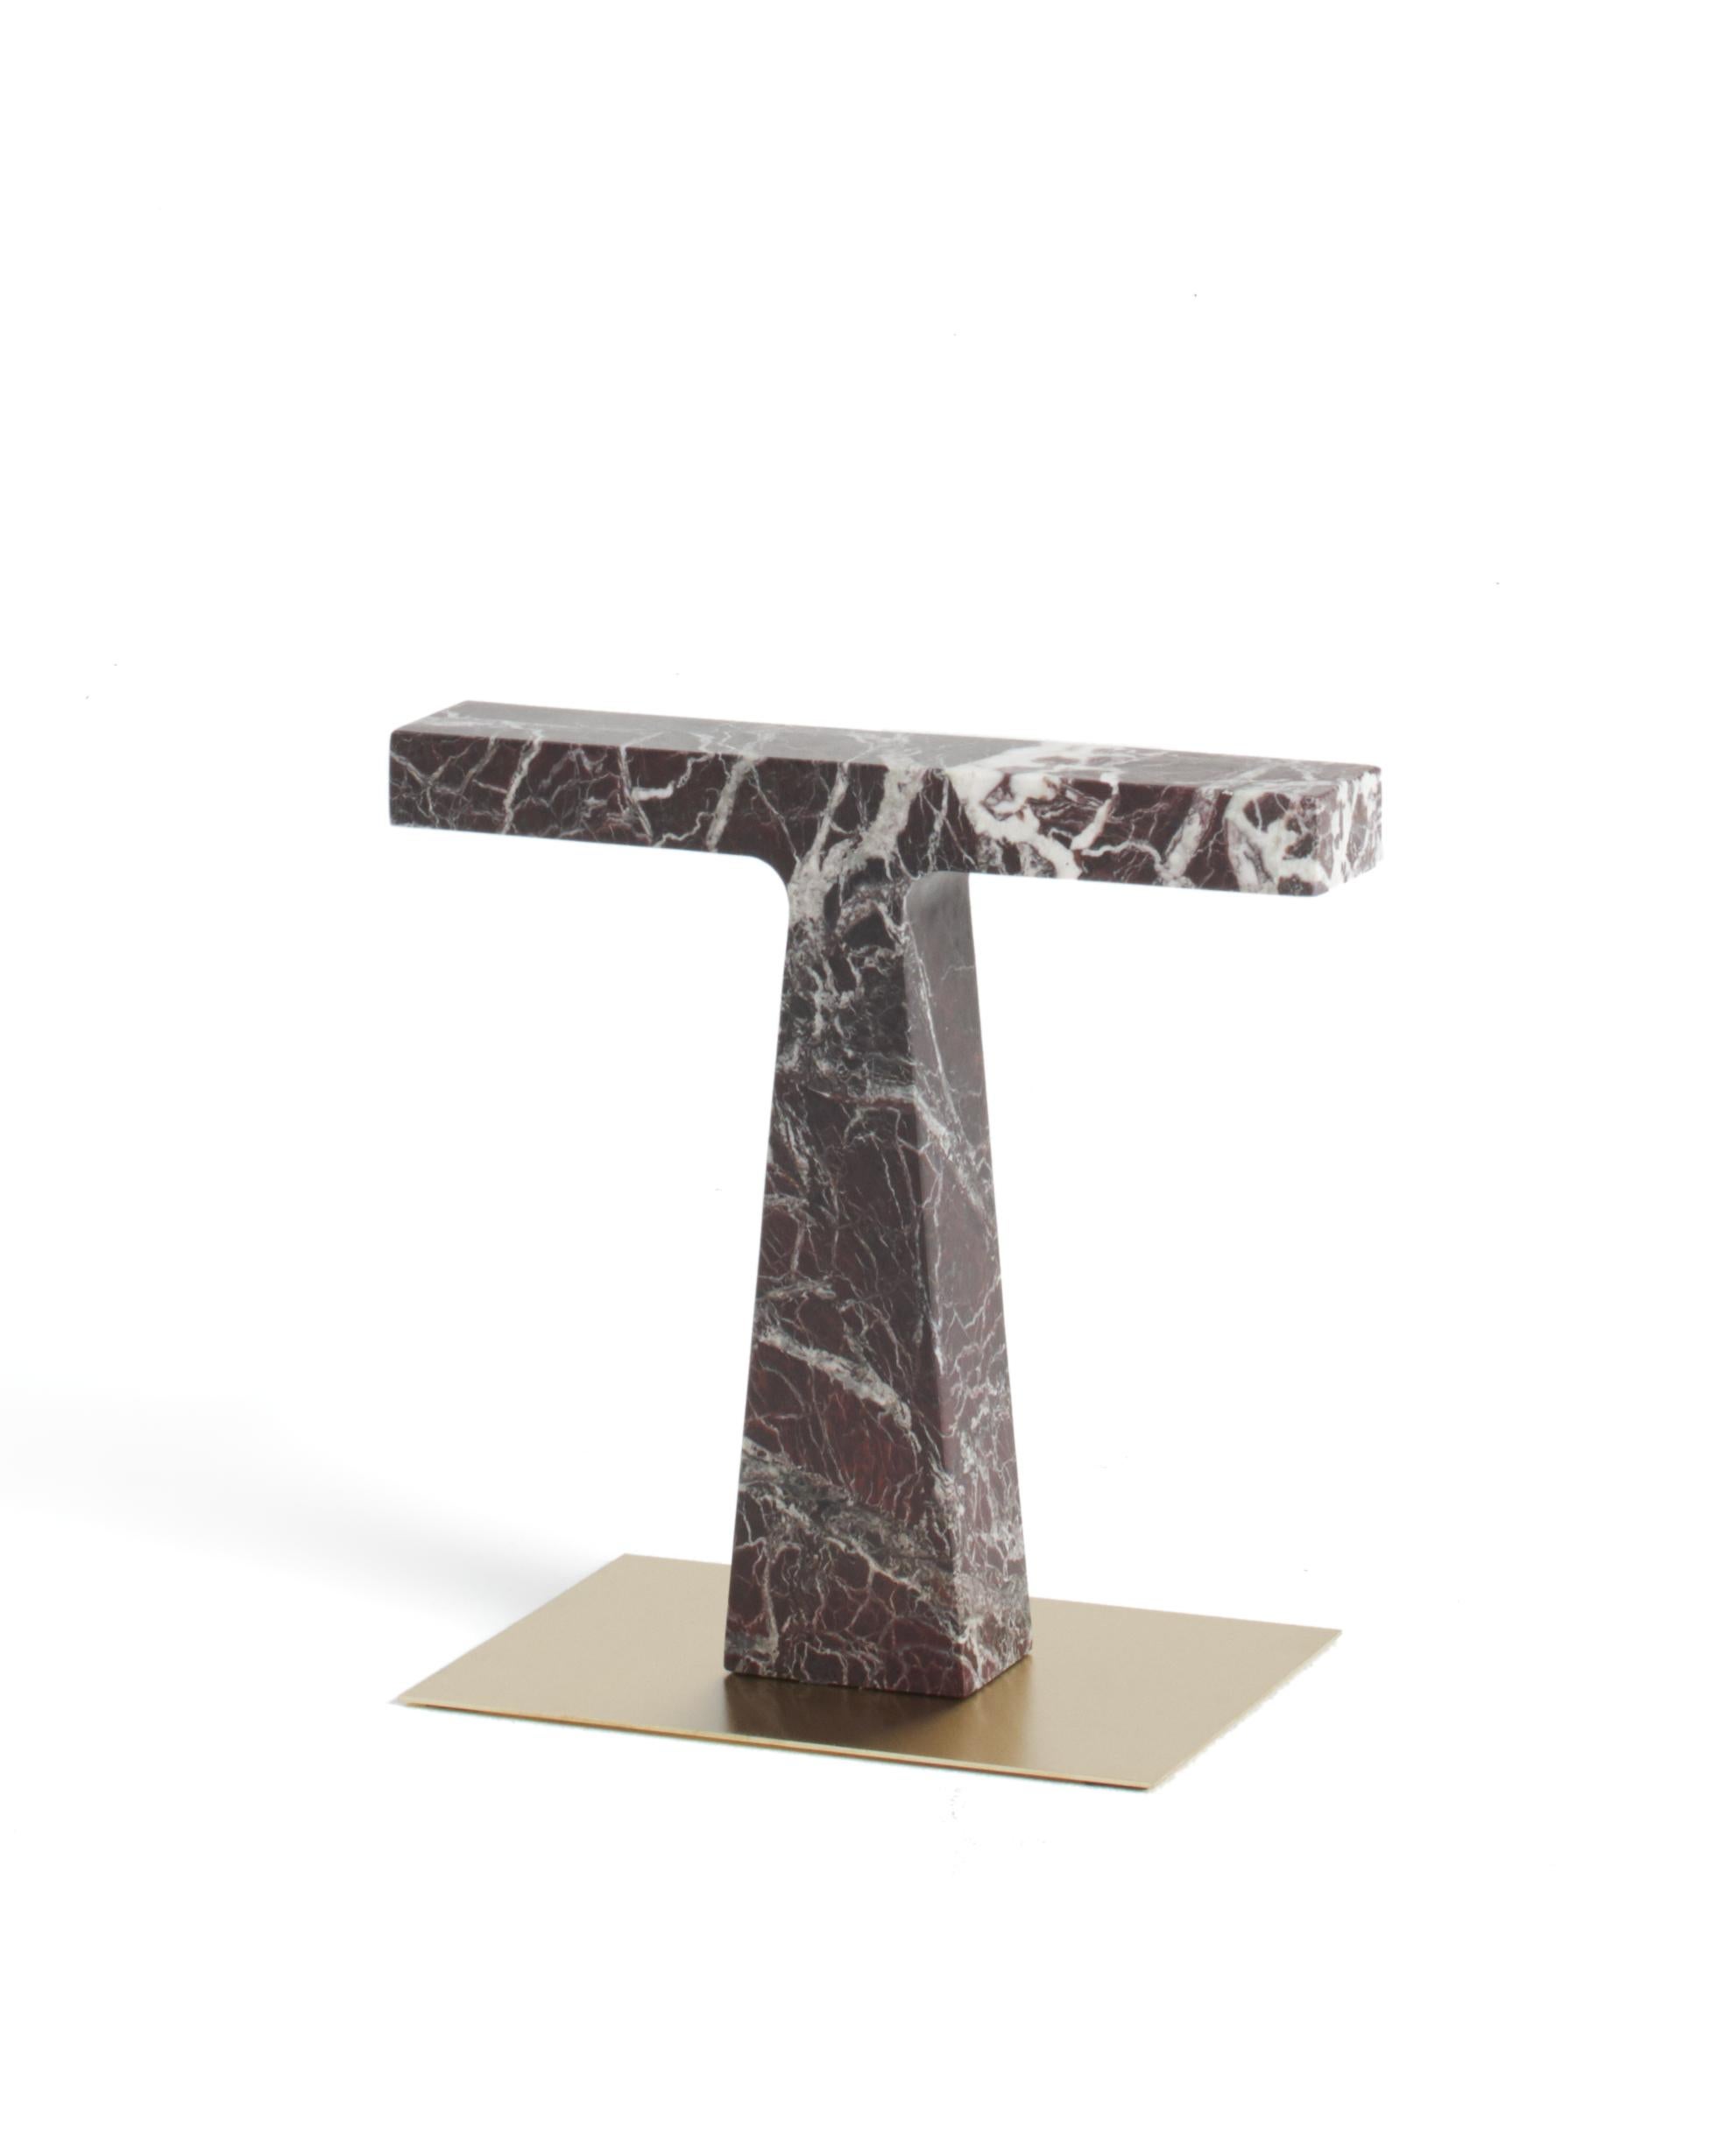 Bruchi marble table lamp by Niko Koronis.
Dimensions: W 37.5 x D 7 x H 35.
Materials: Rosso Levanto.

Also Available: Verde Guatemala.

All our lamps can be wired according to each country. If sold to the USA it will be wired for the USA for